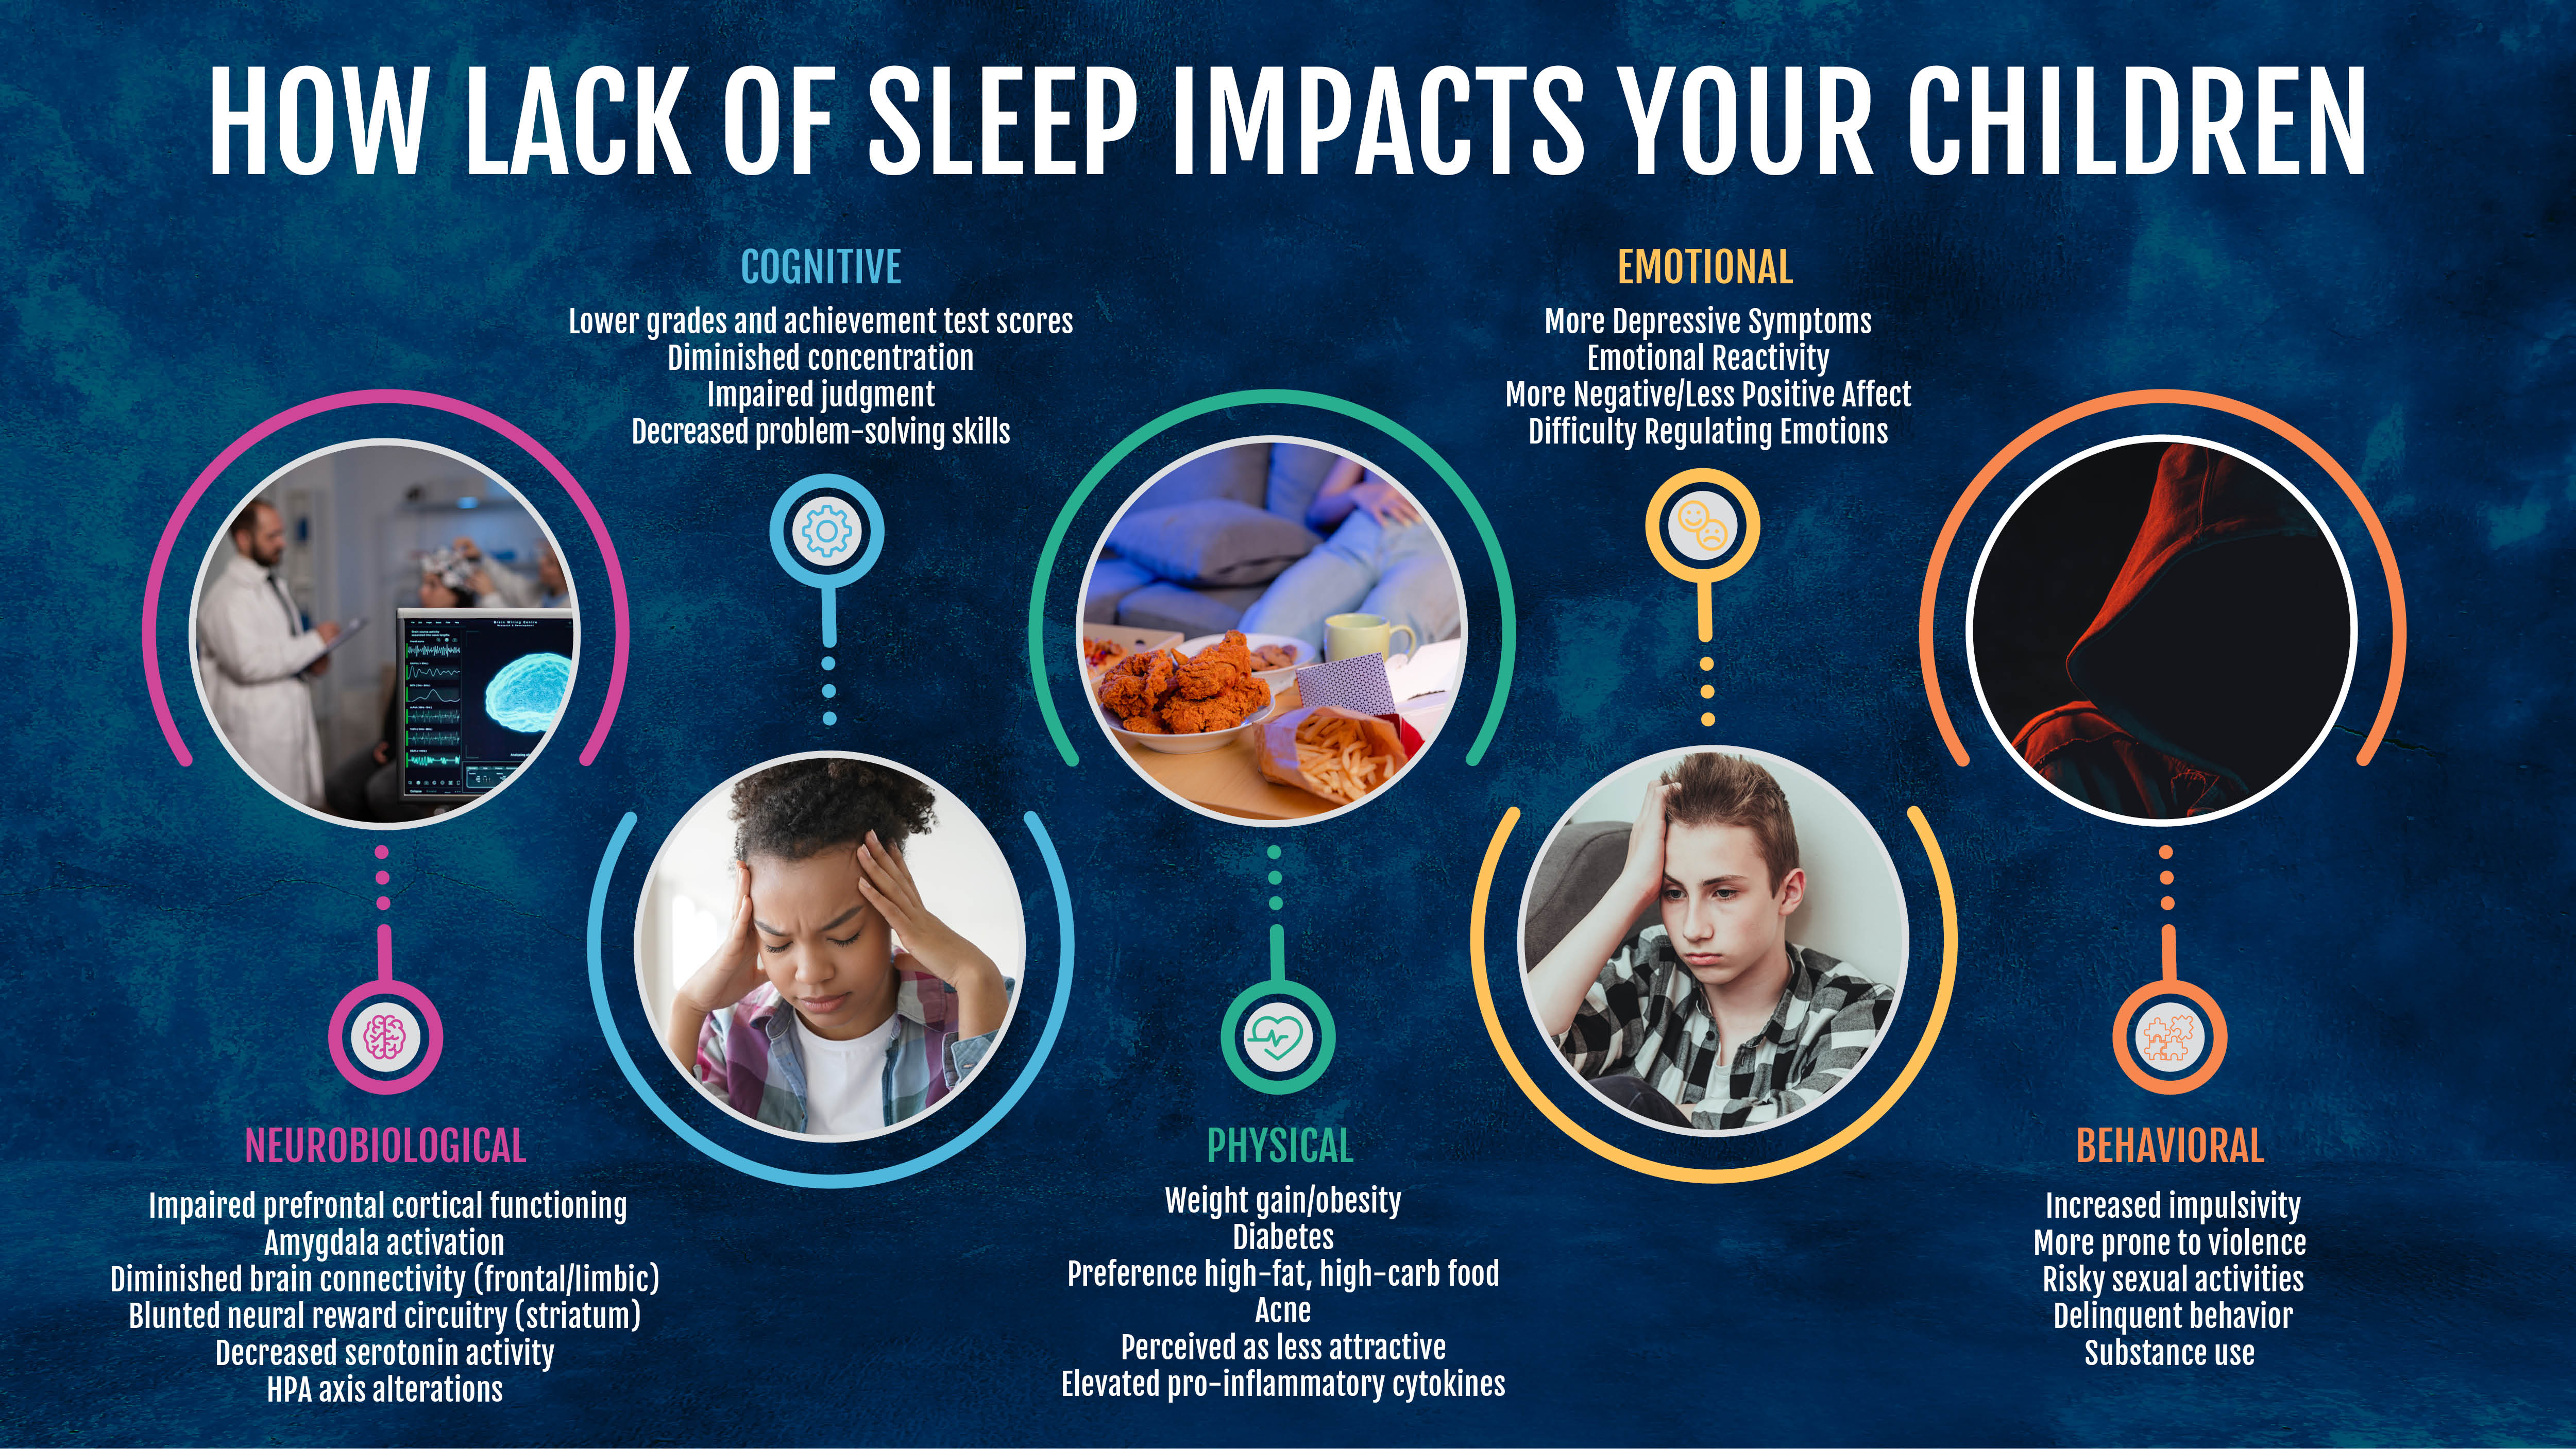 How lack of sleep impacts your children